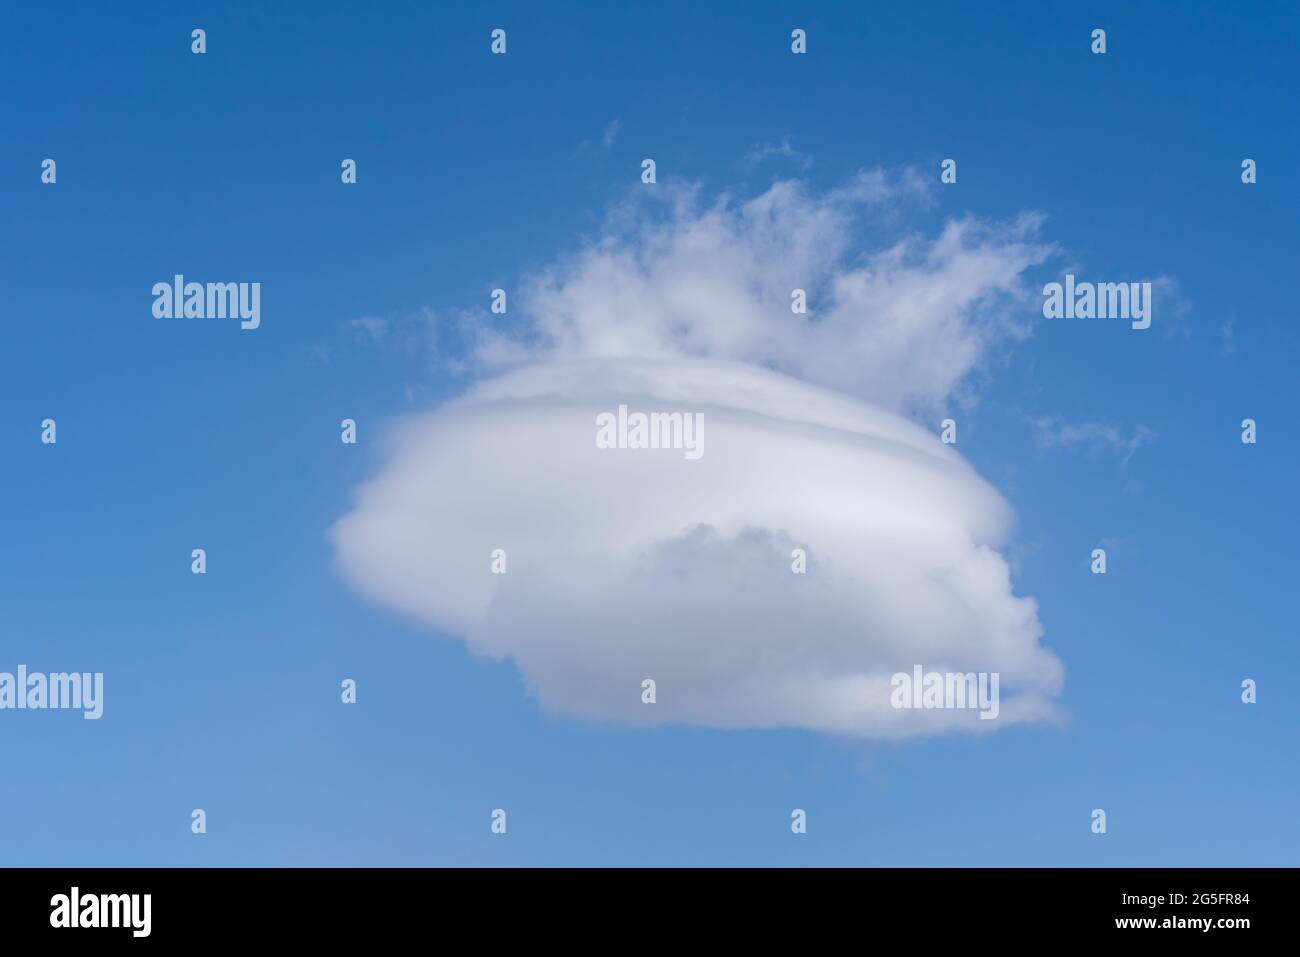 Lenticular cloud with more clouds coming out of the top creating a pot shape with steam. Stock Photo